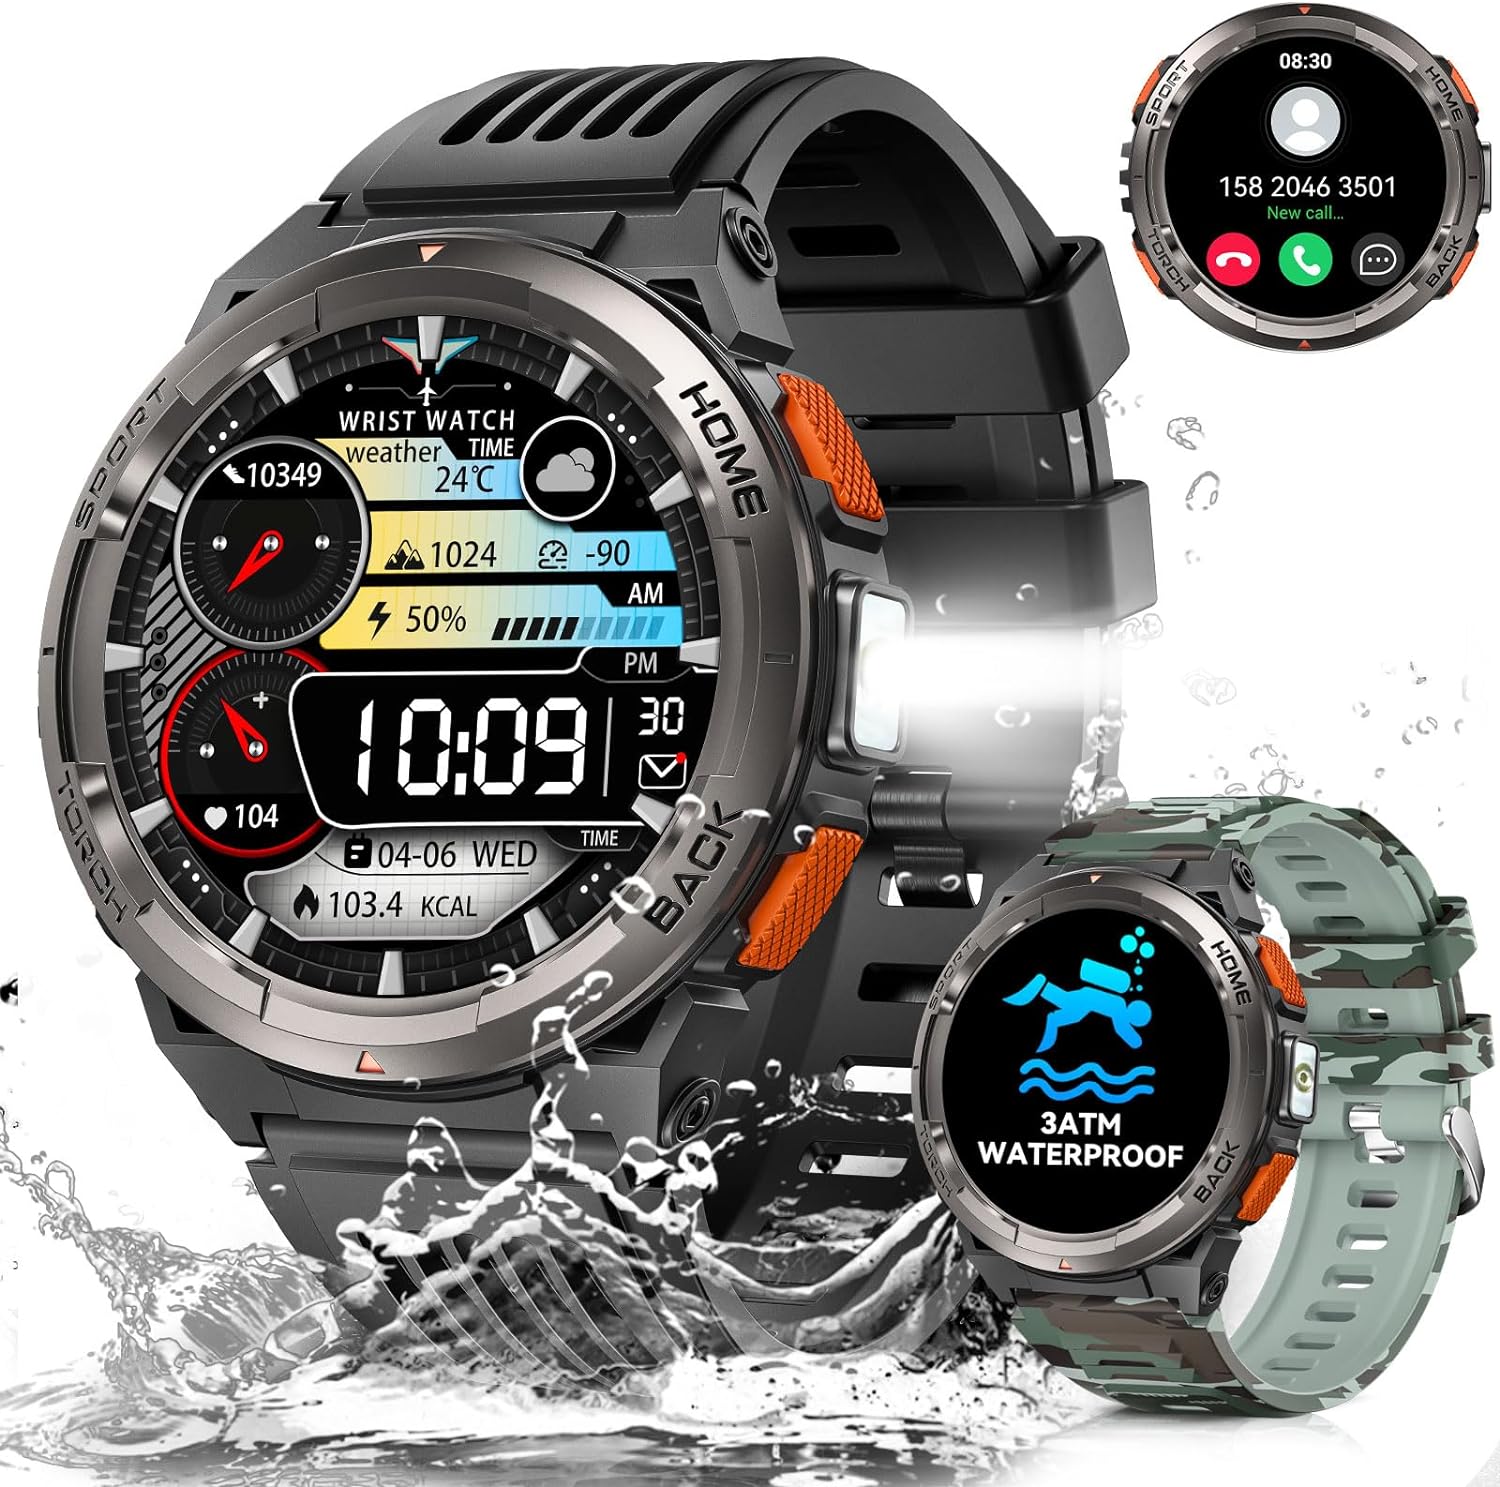 Military Smart Watch for Men 3ATM Waterproof with LED Flashlight 1.45" Rugged Tactical Smartwatch with Compass Elevation Barometer Sports Fitness Tracker with HR/SPO2/Sleep Monitor for iPhone Android